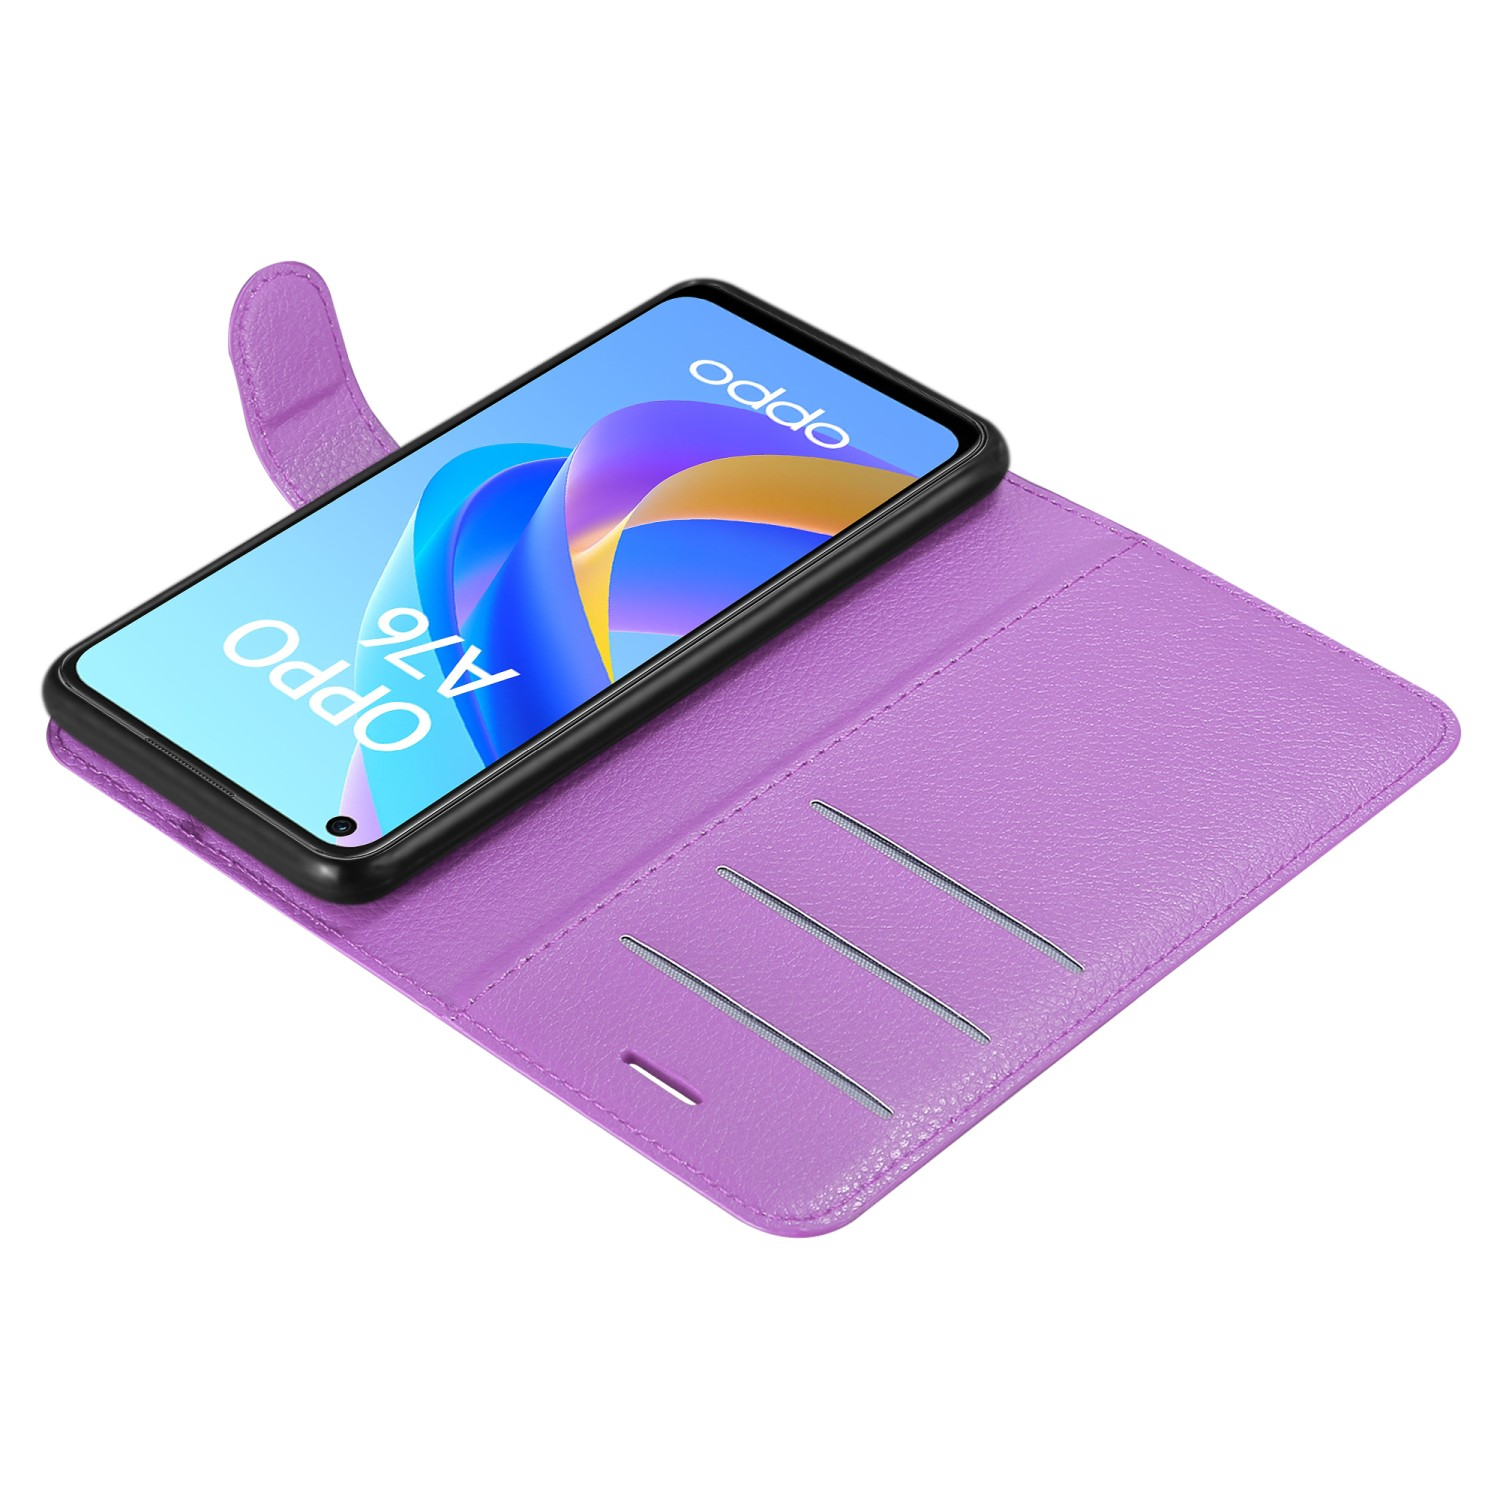 4G Oppo, Realme MANGAN Hülle Standfunktion, 9i, A76 VIOLETT A96 / Bookcover, / / Book A36 K10 CADORABO 4G /